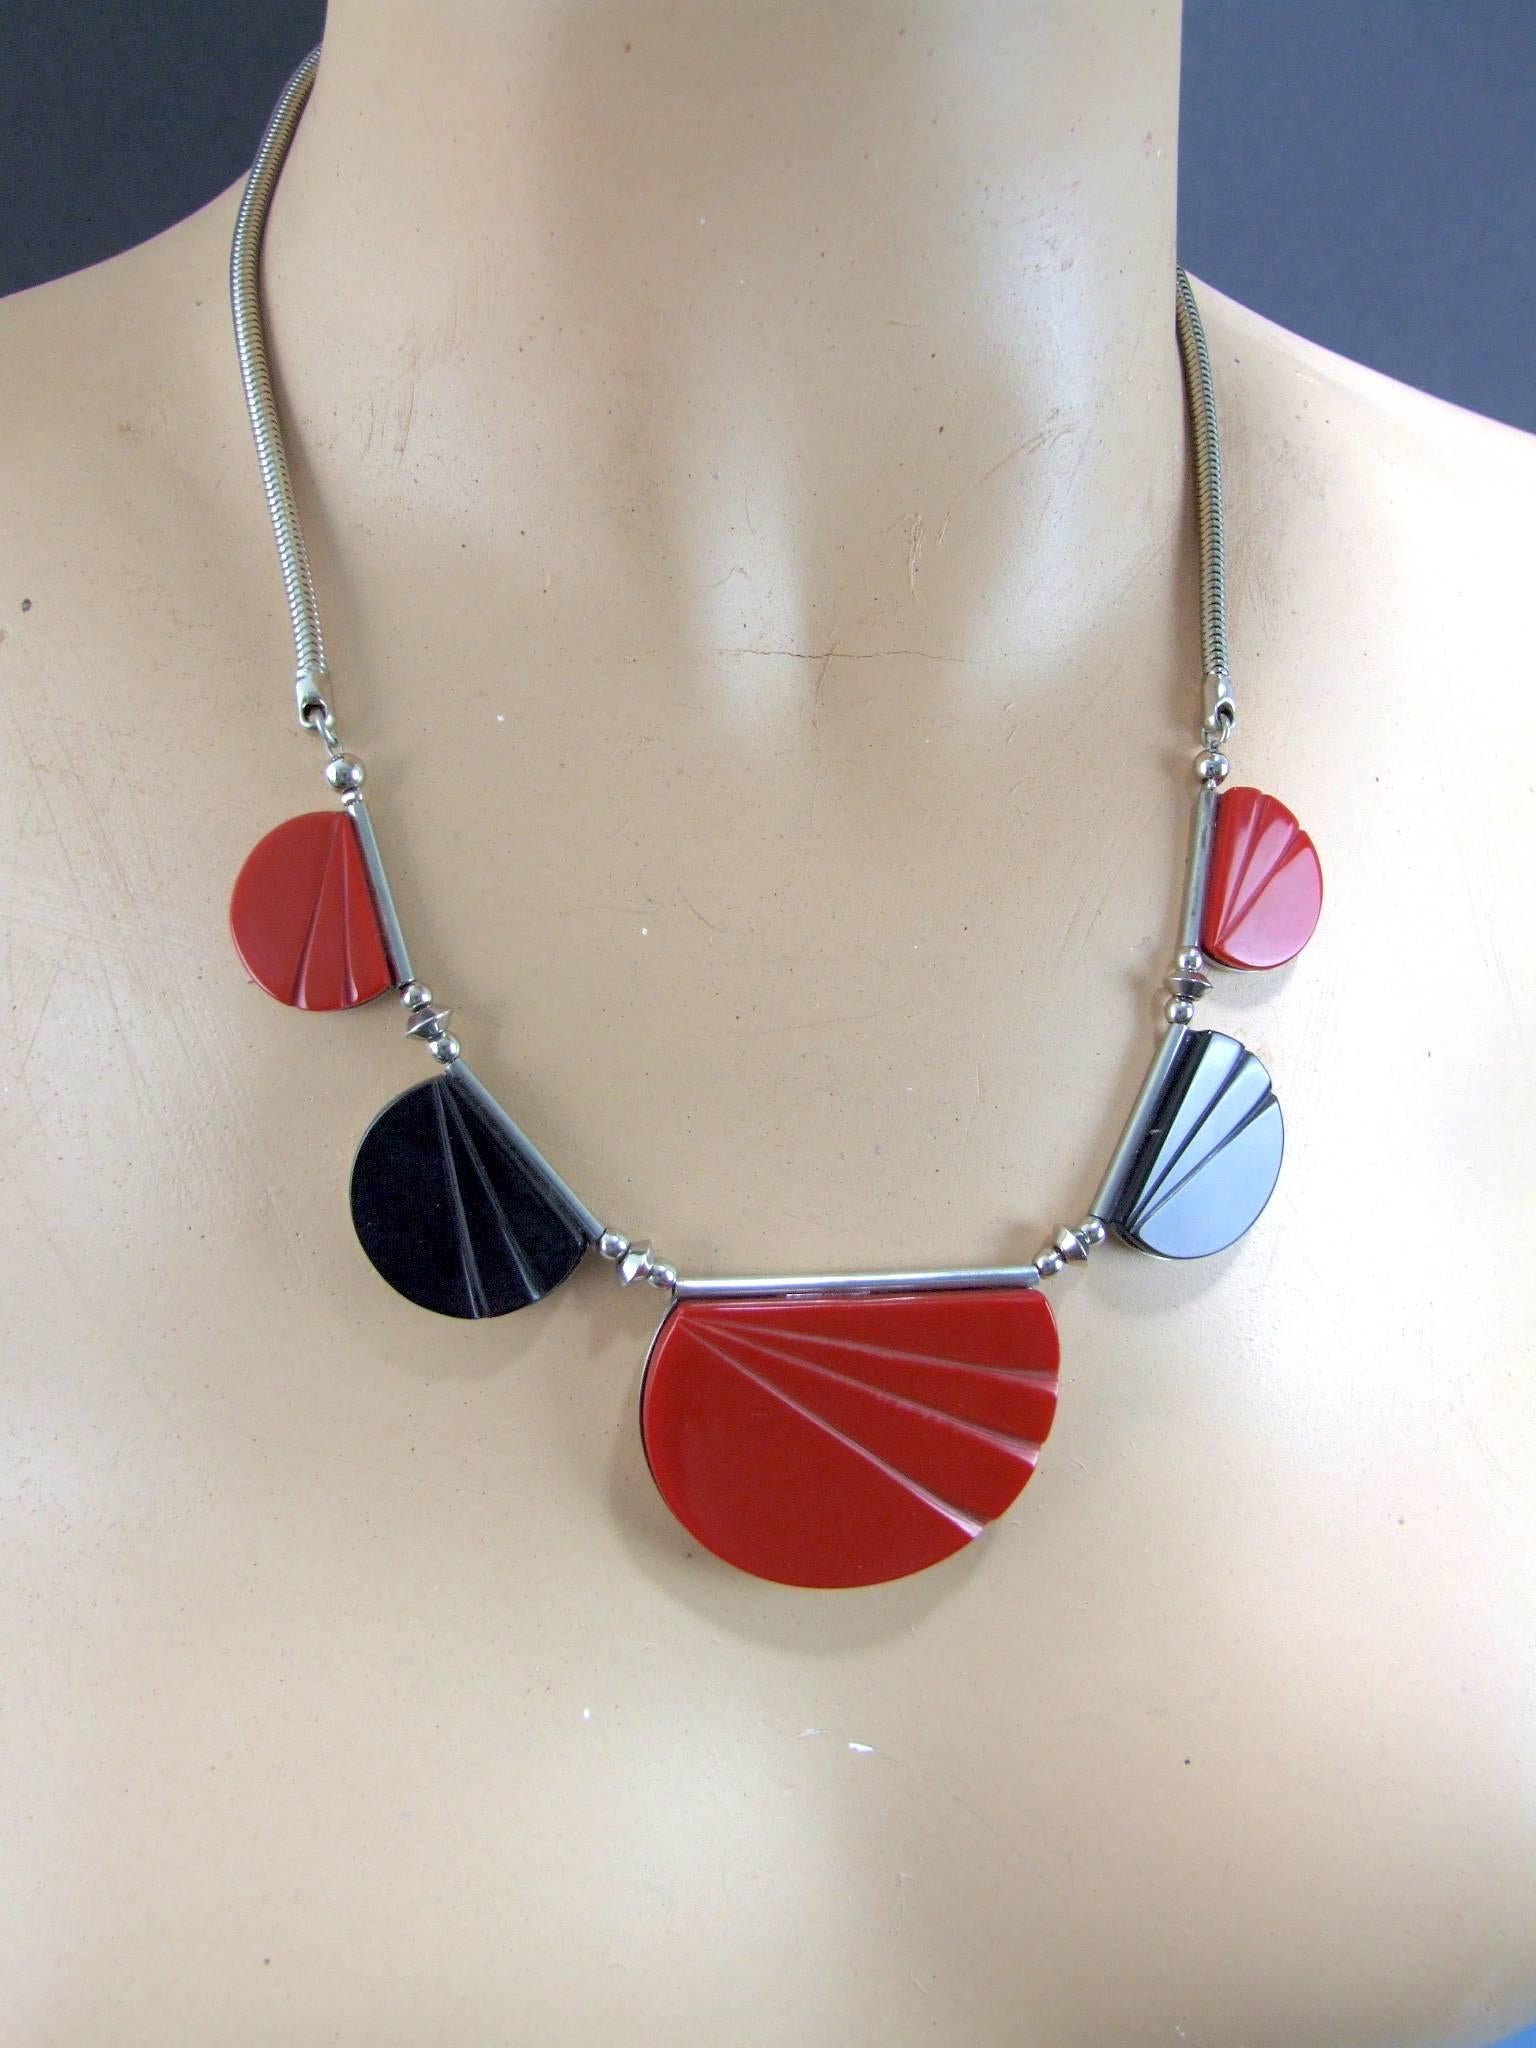 Mid-20th Century Modernist Art Deco Necklace by Jakob Bengel, circa 1930 For Sale